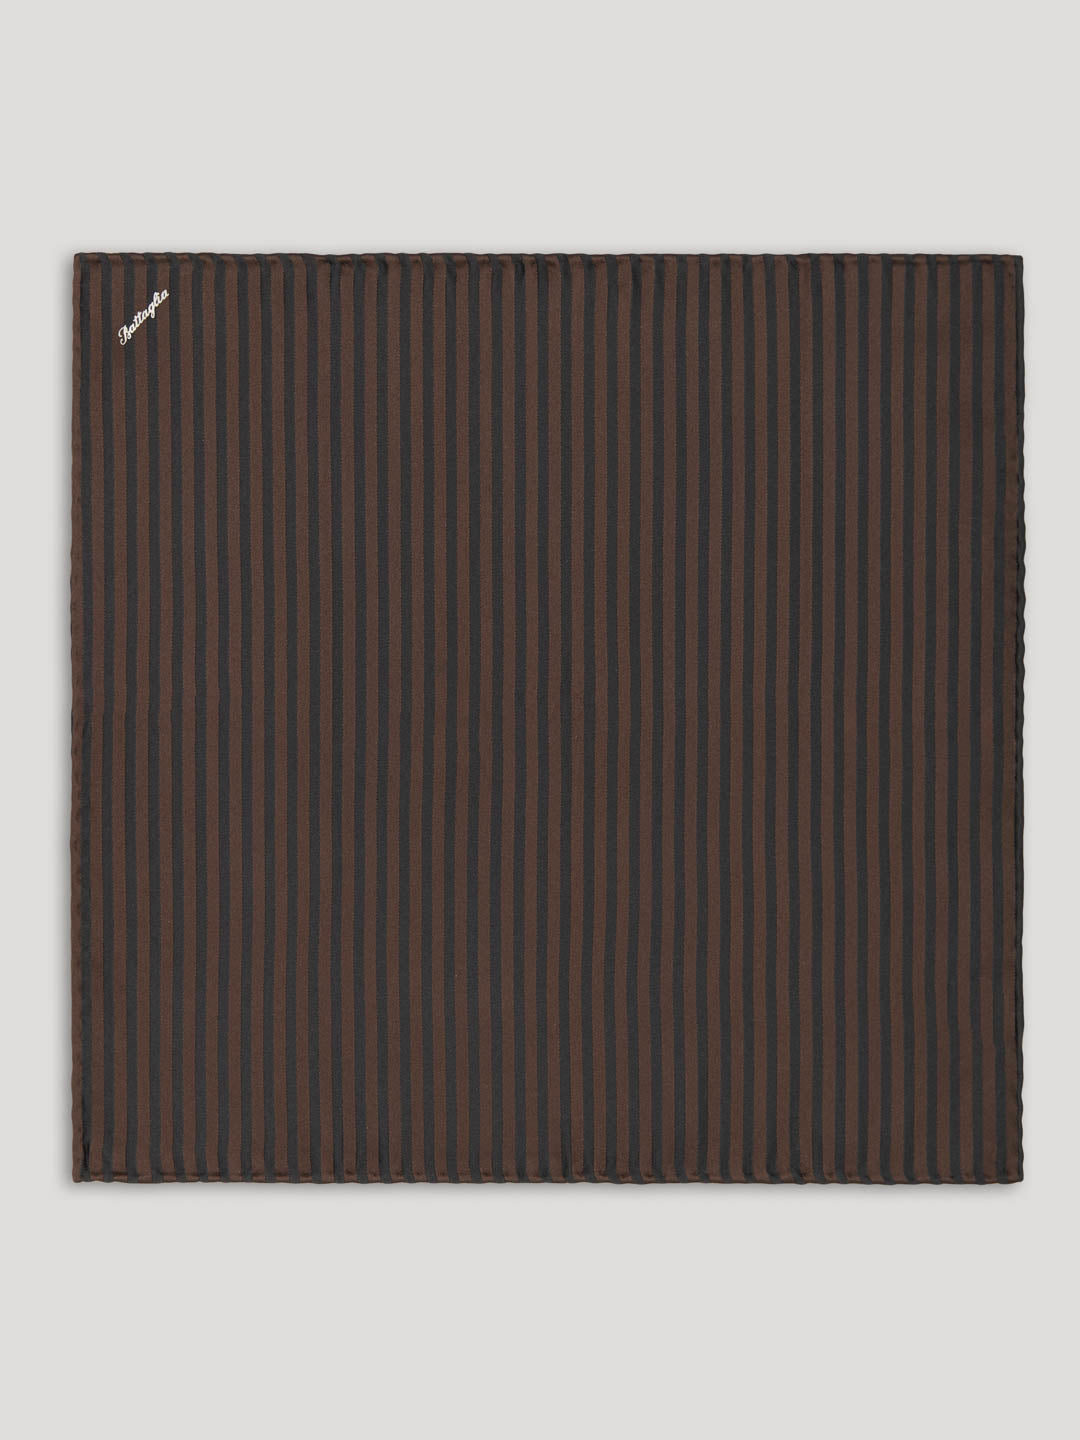 Black and brown striped handkerchief. 